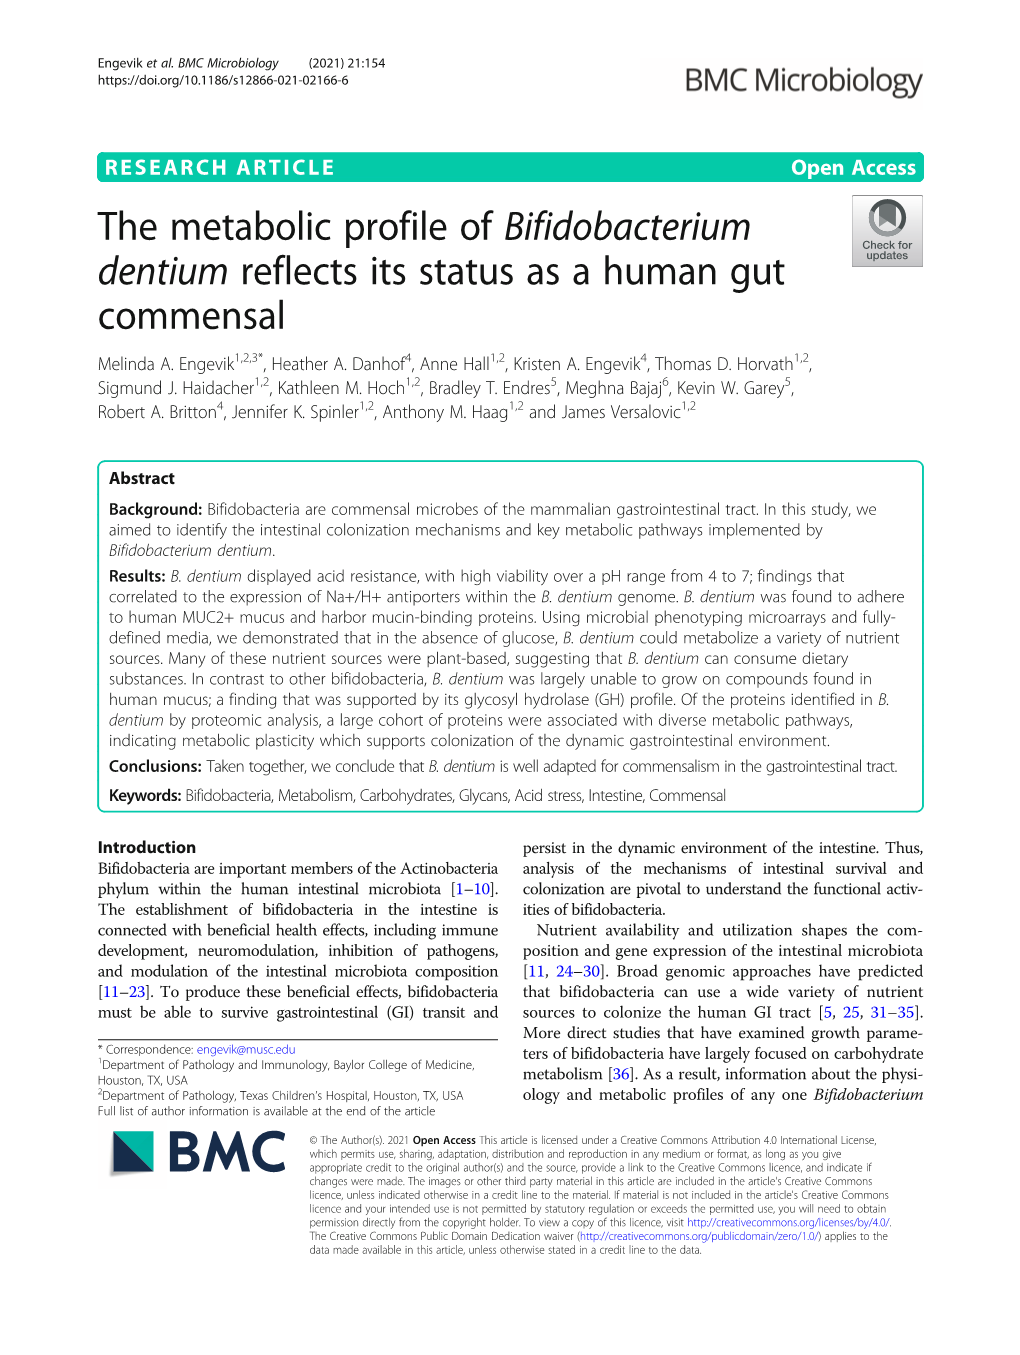 The Metabolic Profile of Bifidobacterium Dentium Reflects Its Status As a Human Gut Commensal Melinda A